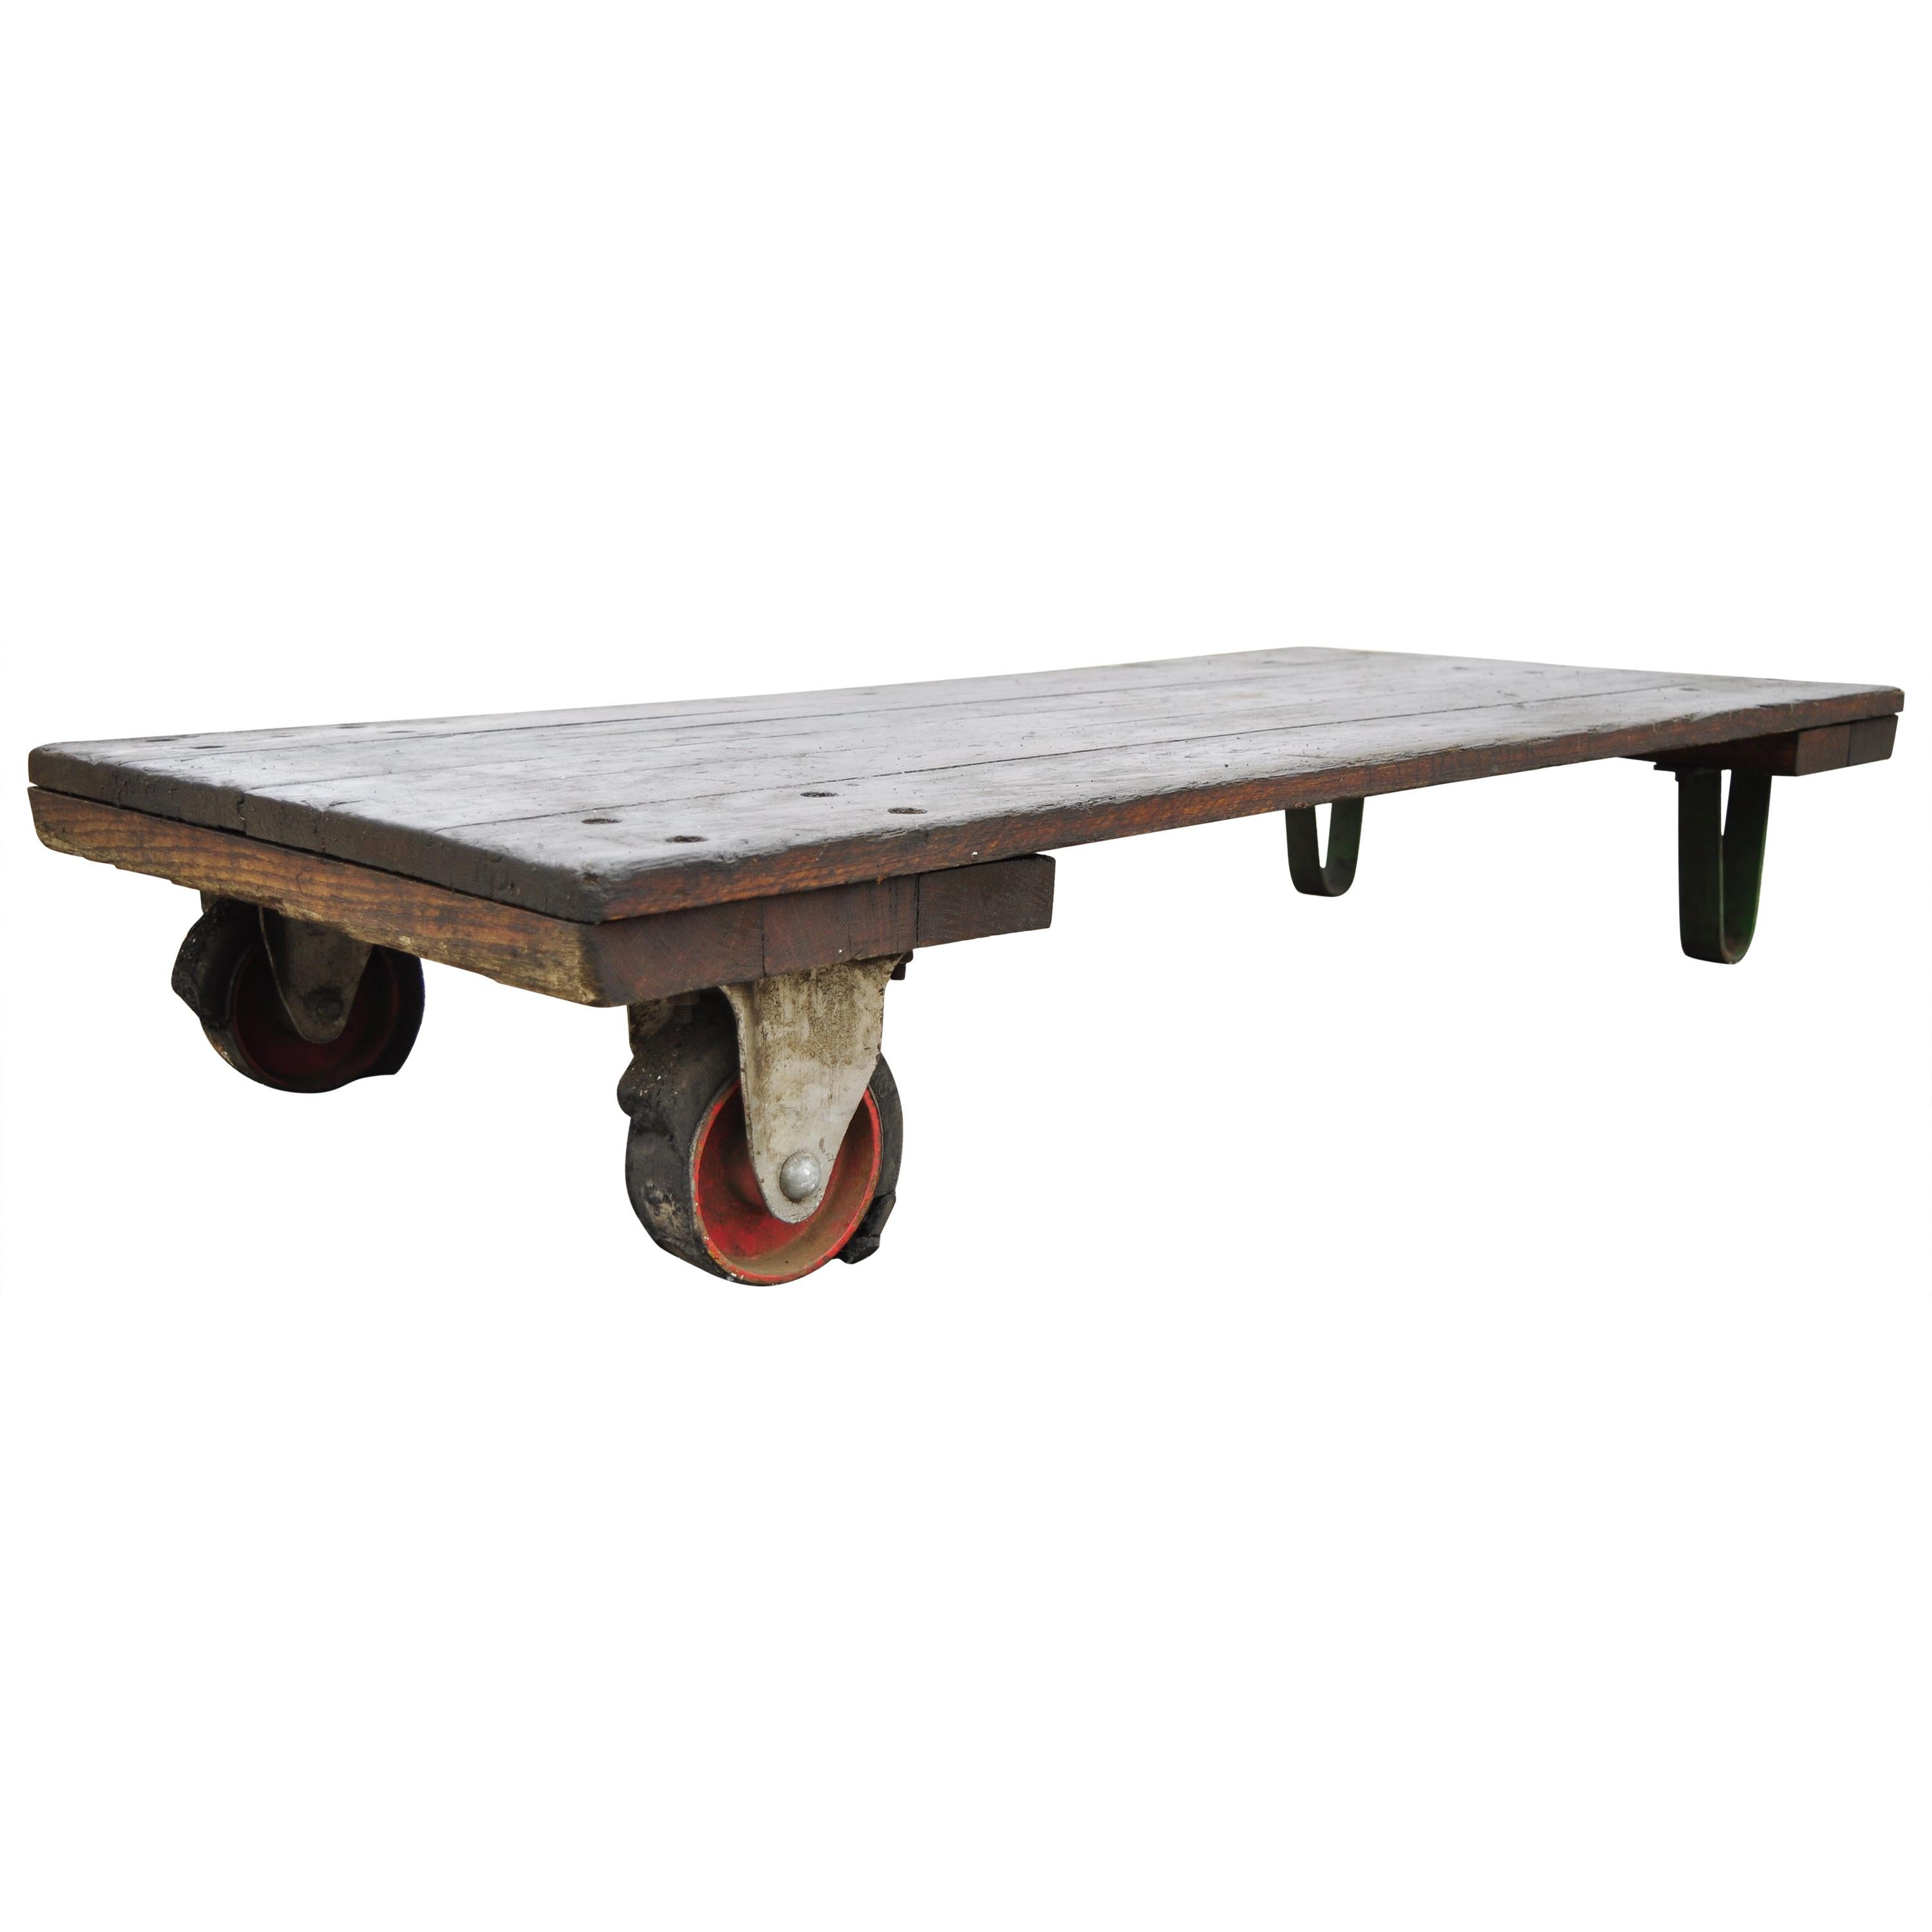 Fairbanks American Industrial Wood and Iron Factory Work Cart Coffee Table 'A'